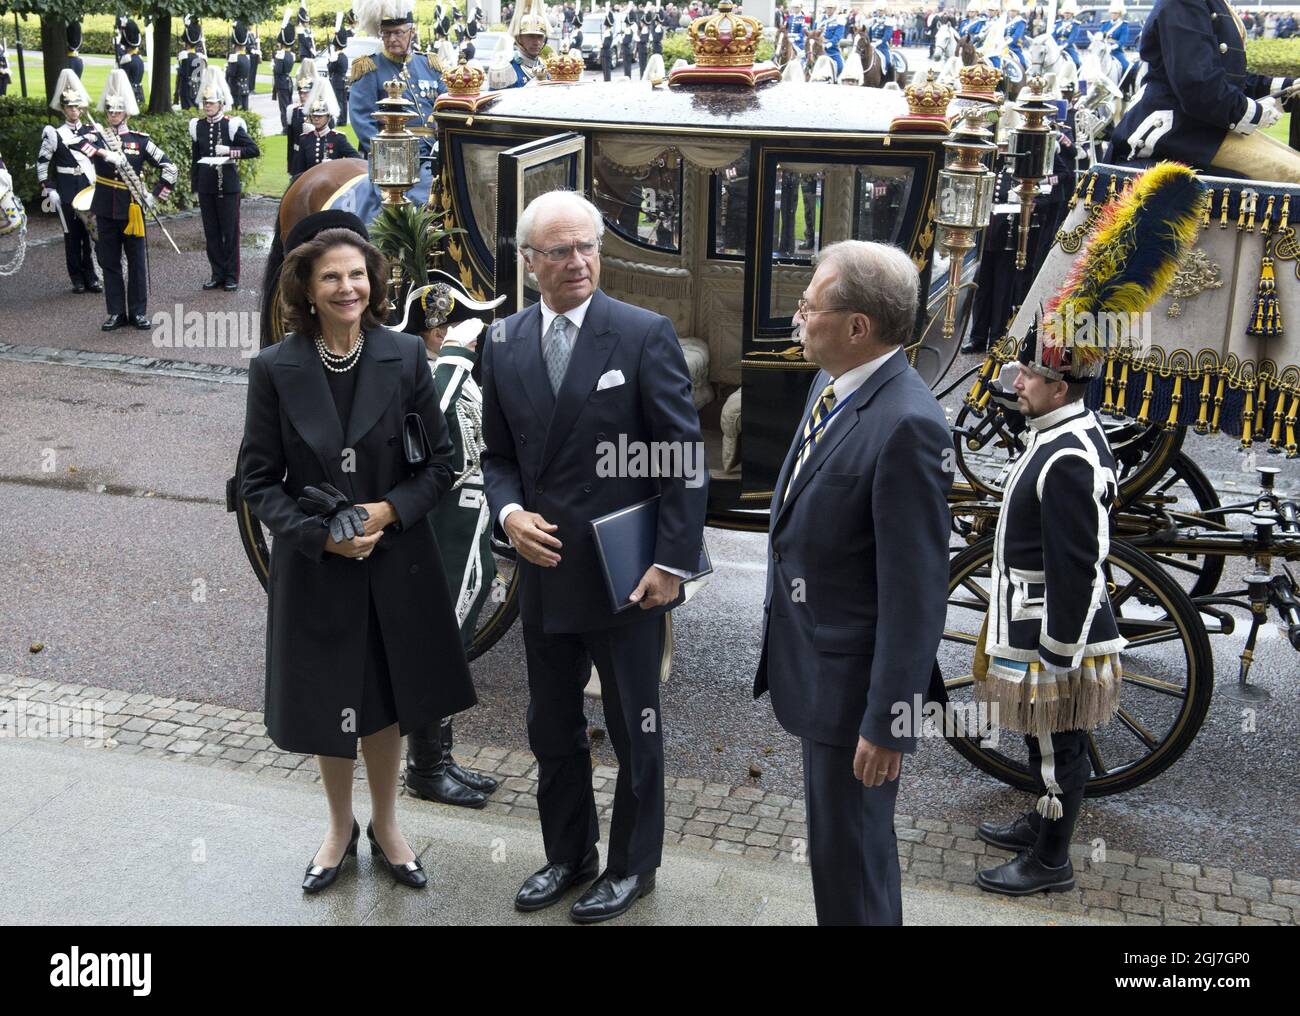 STOCKHOLM 20120918 Queen Silvia, King Carl Gustaf and the Speaker of the House of Parliament Per Westerberg are seen arriving to the opening of the Parliament in Stockholm, Sweden, September 18, 2012. Foto Bertil Enevåg Ericson / SCANPIX / kod 10000   Stock Photo